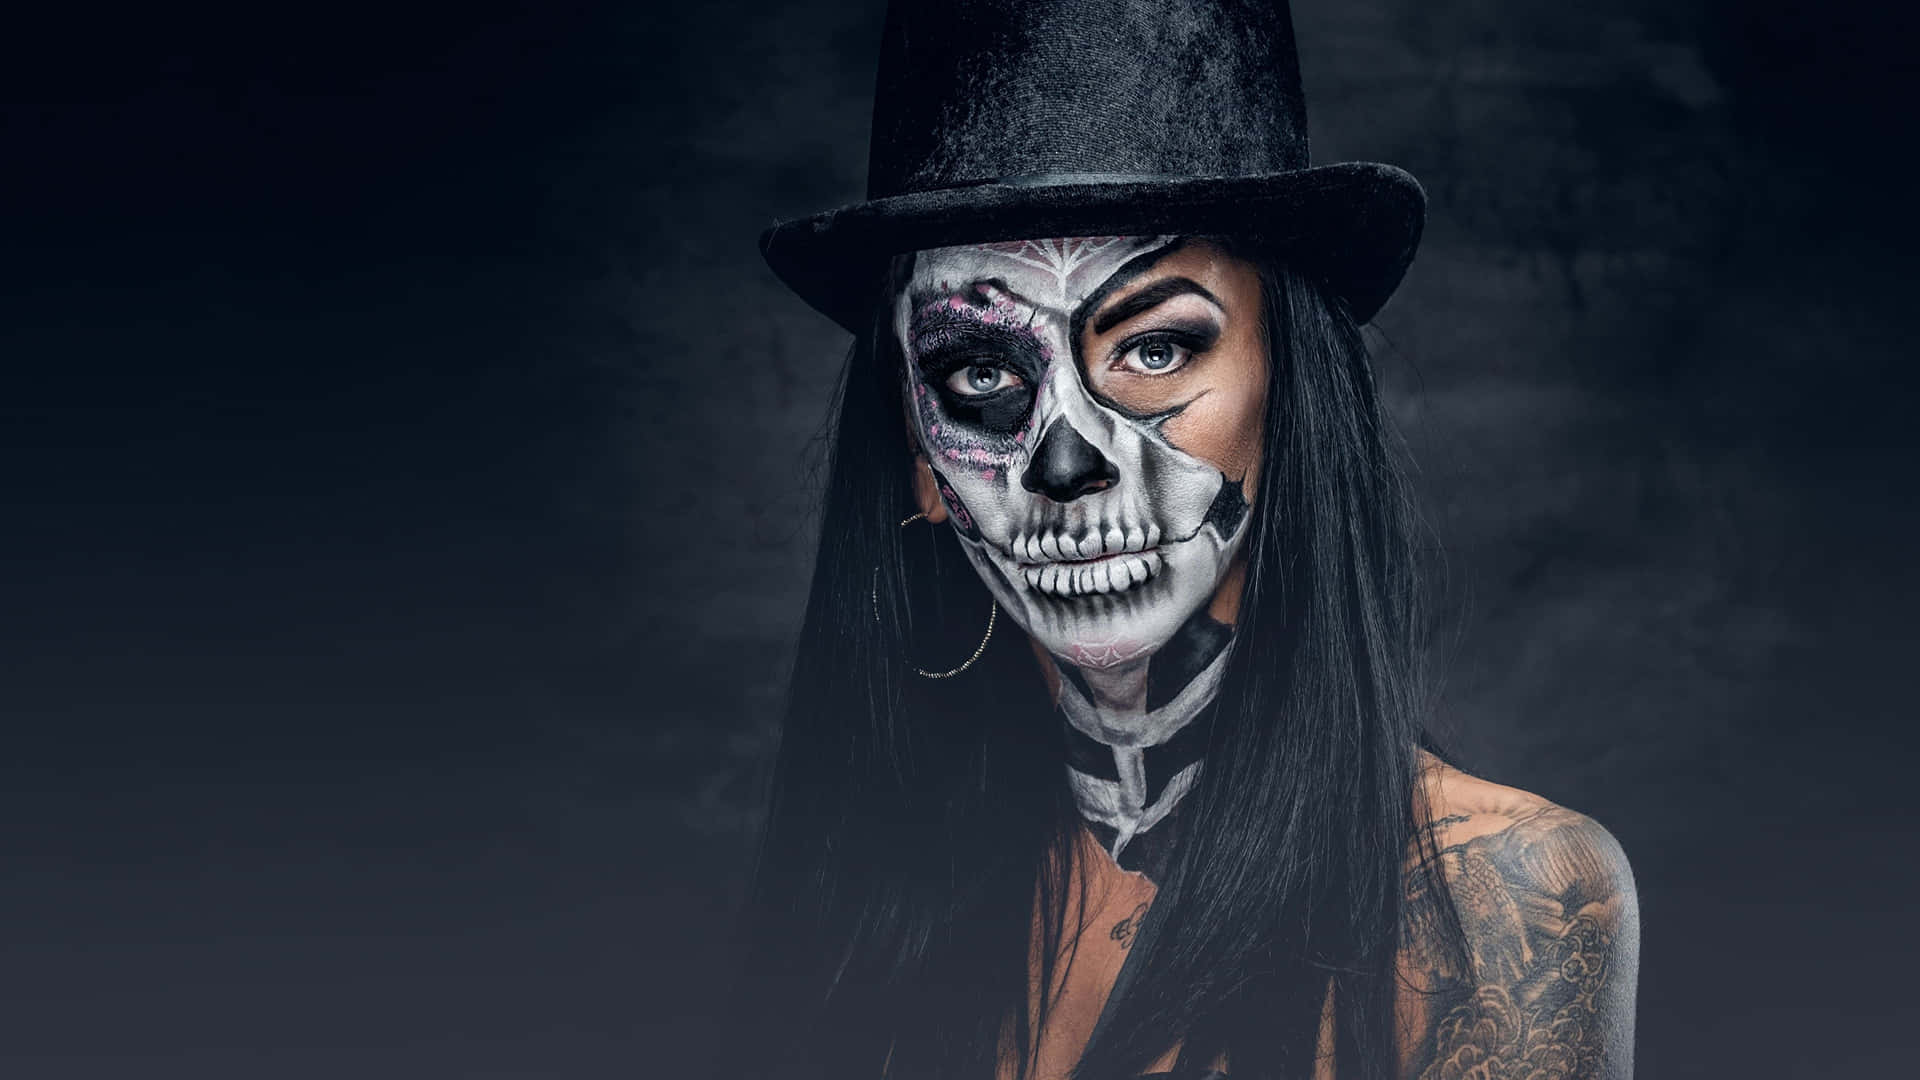 A Woman With Skeleton Makeup And A Top Hat